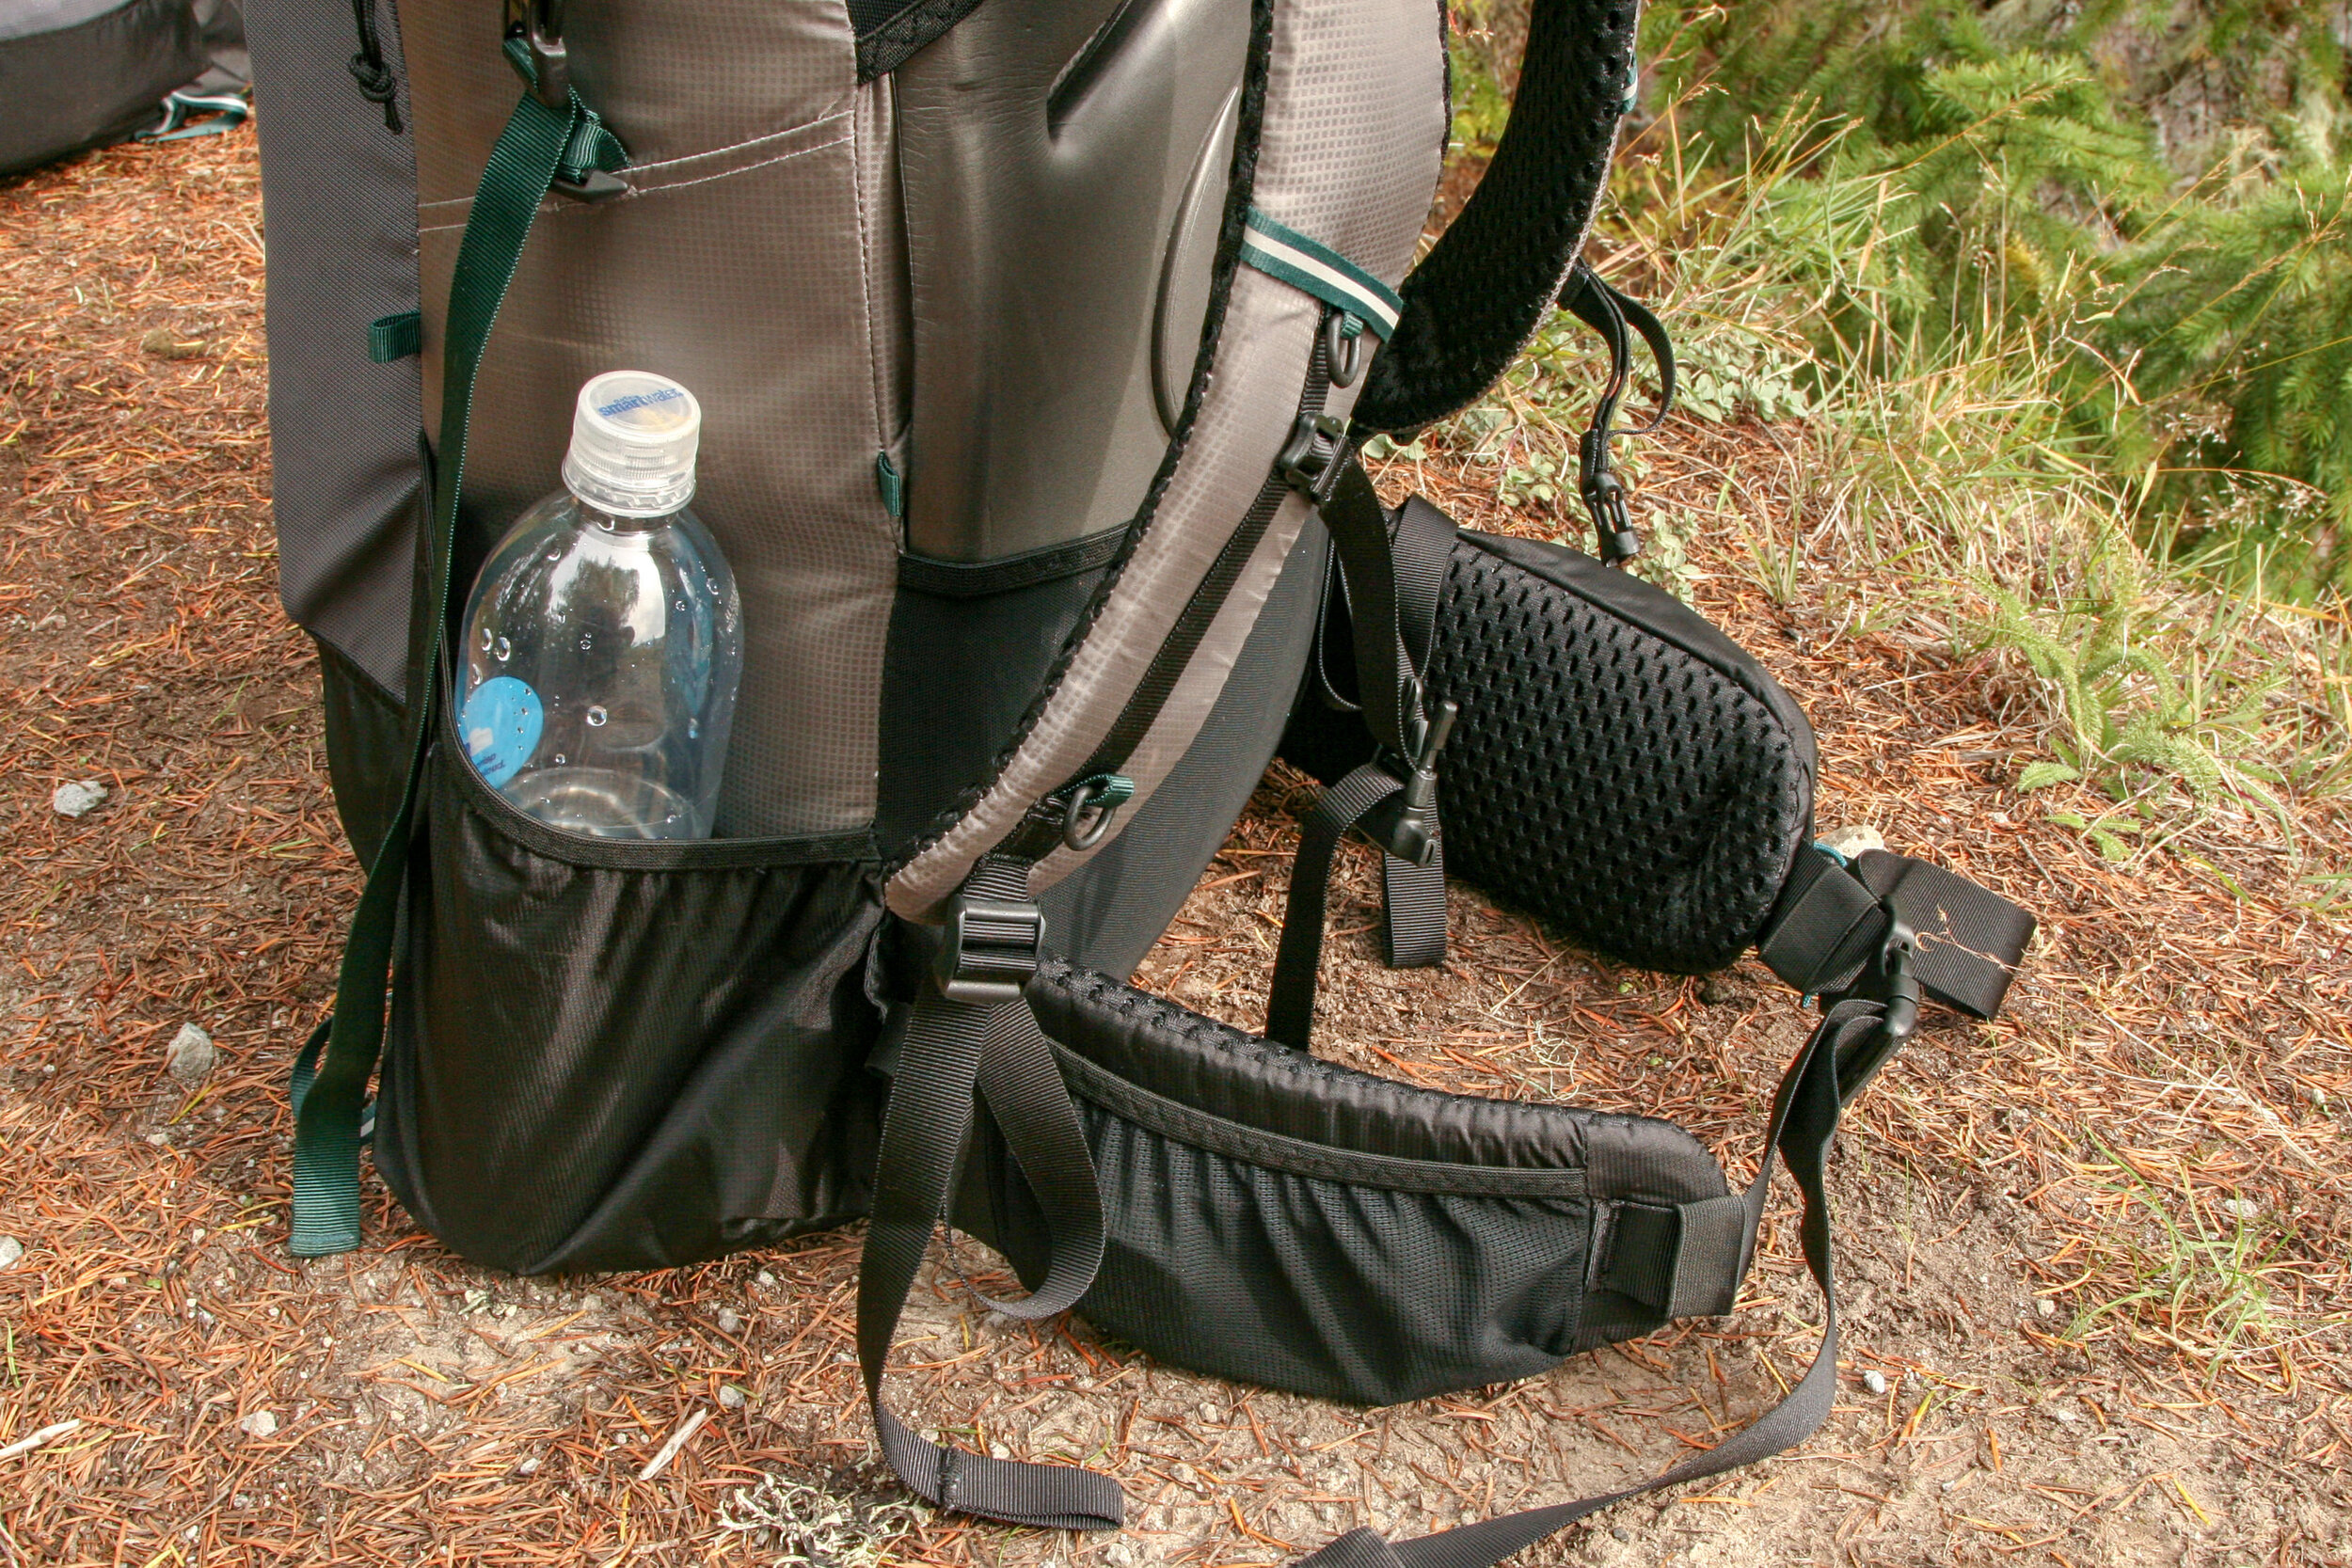 A close- up of the low side water bottle pocket